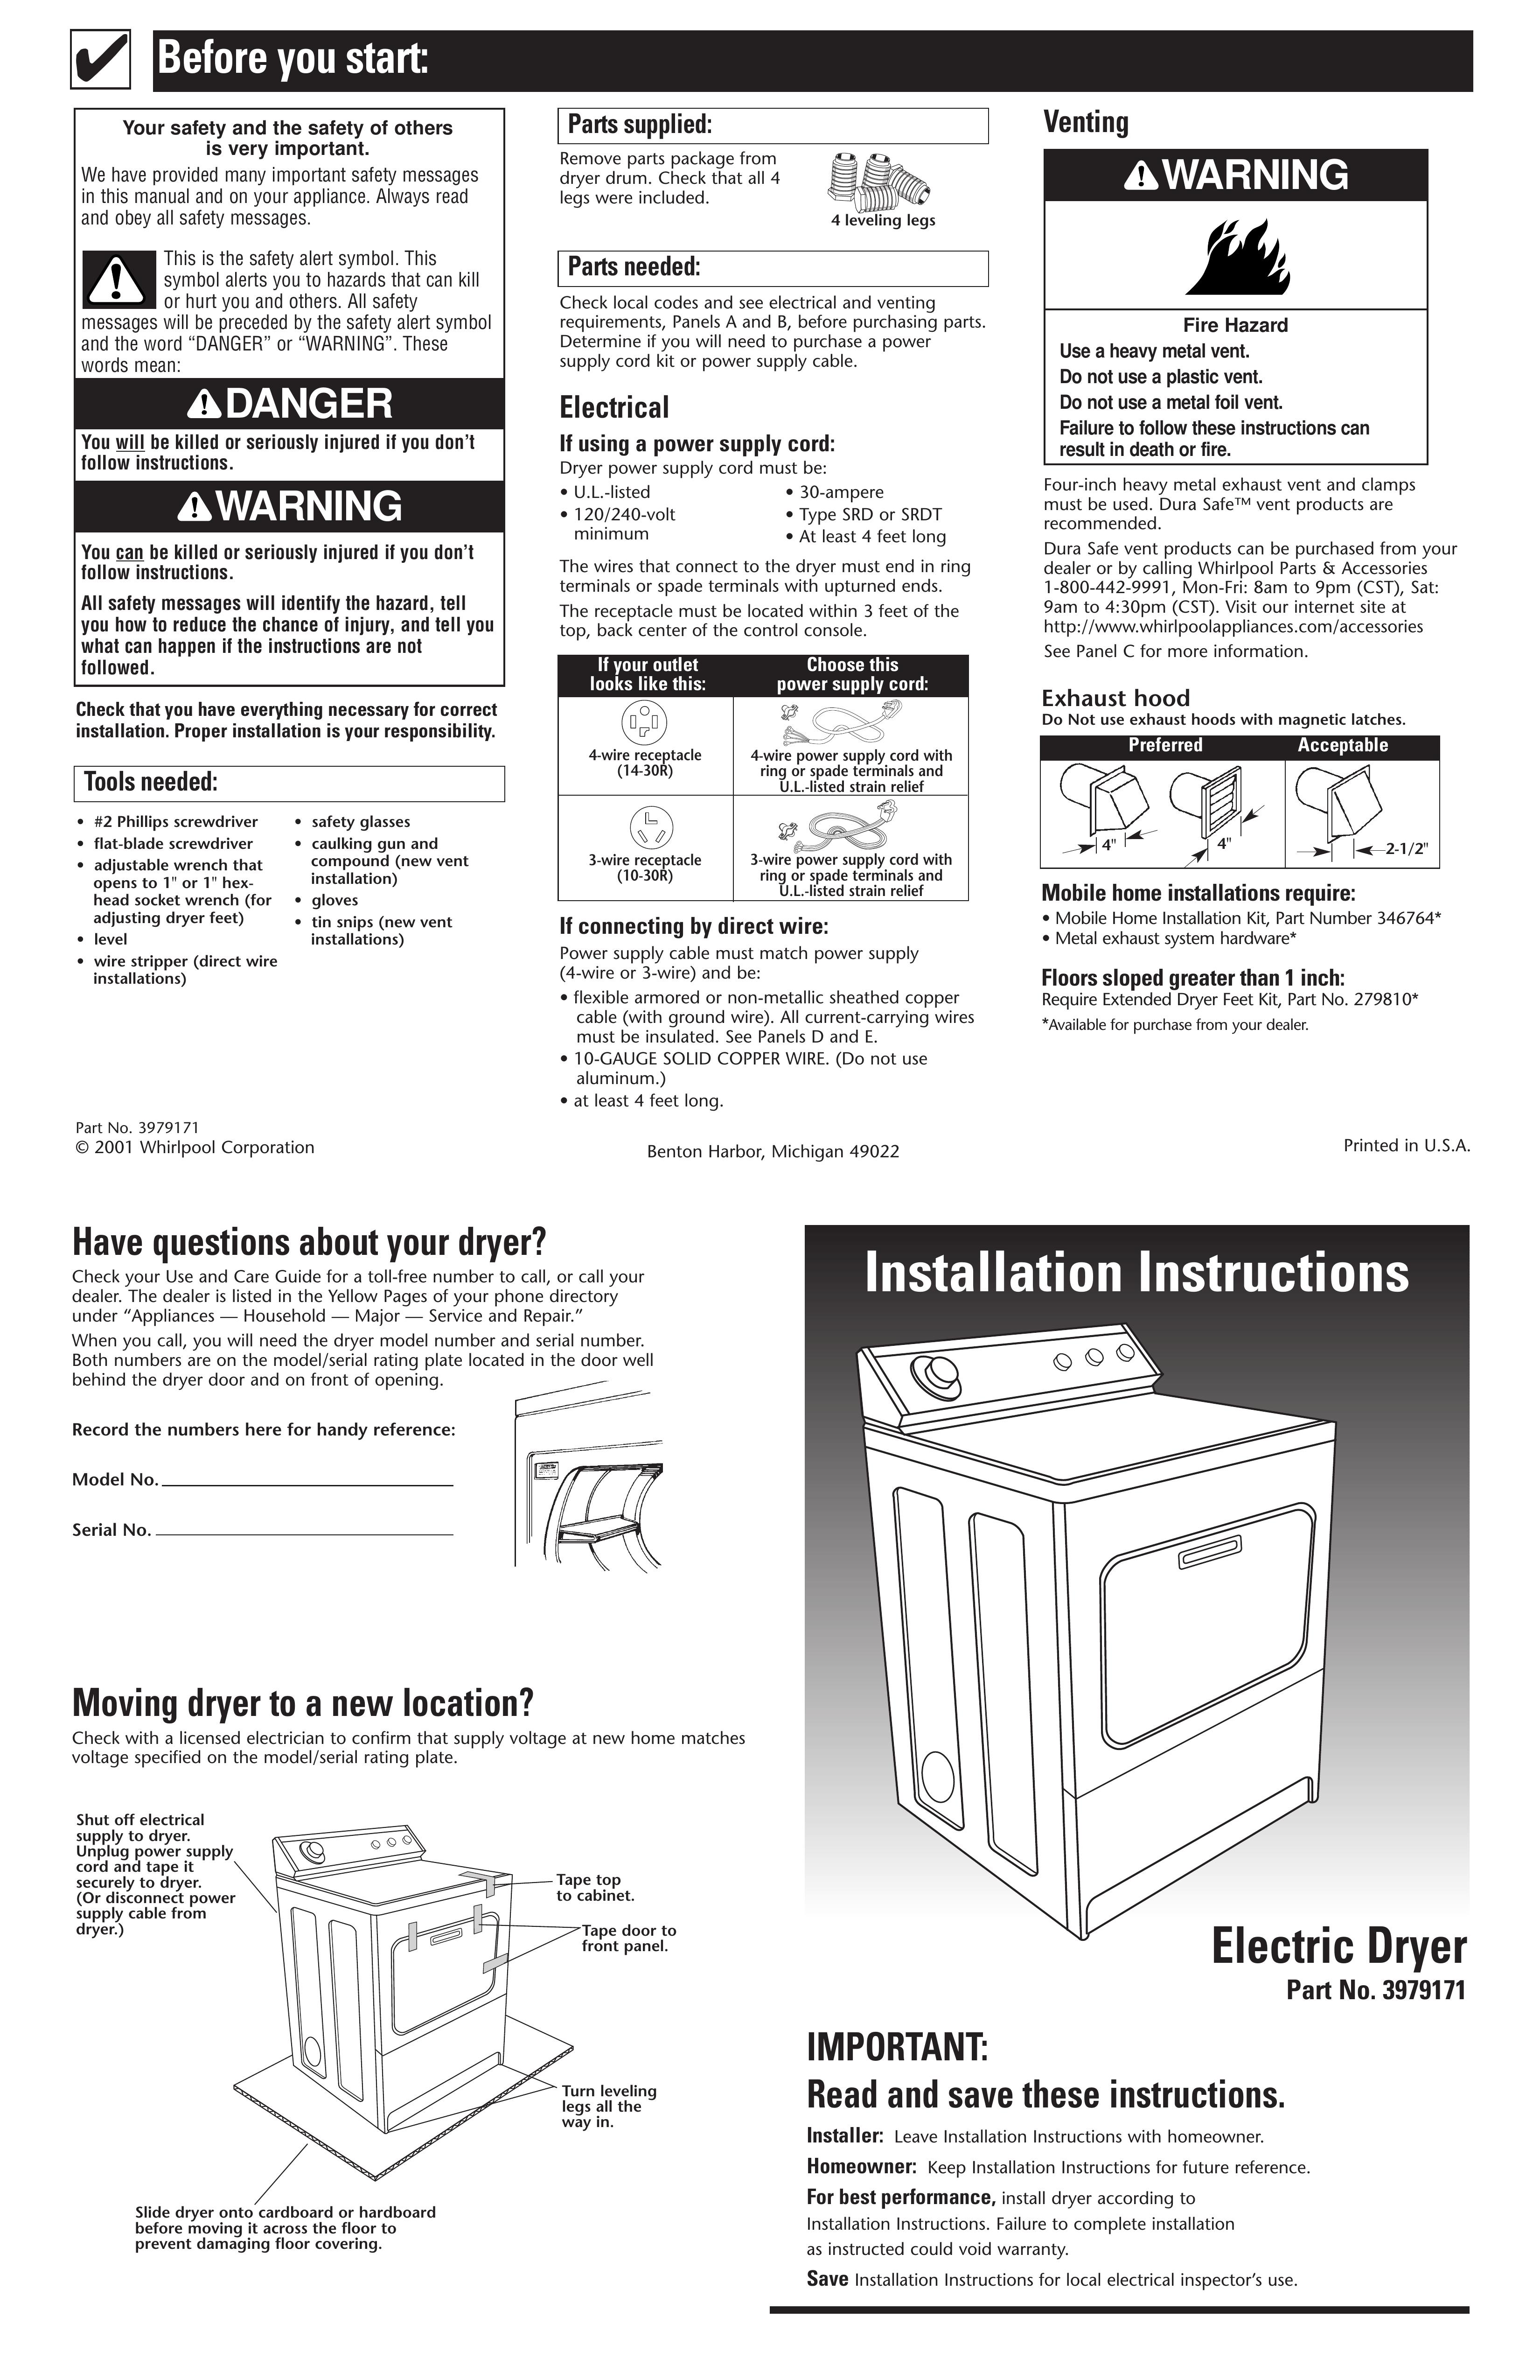 Whirlpool 3979171 Clothes Dryer User Manual